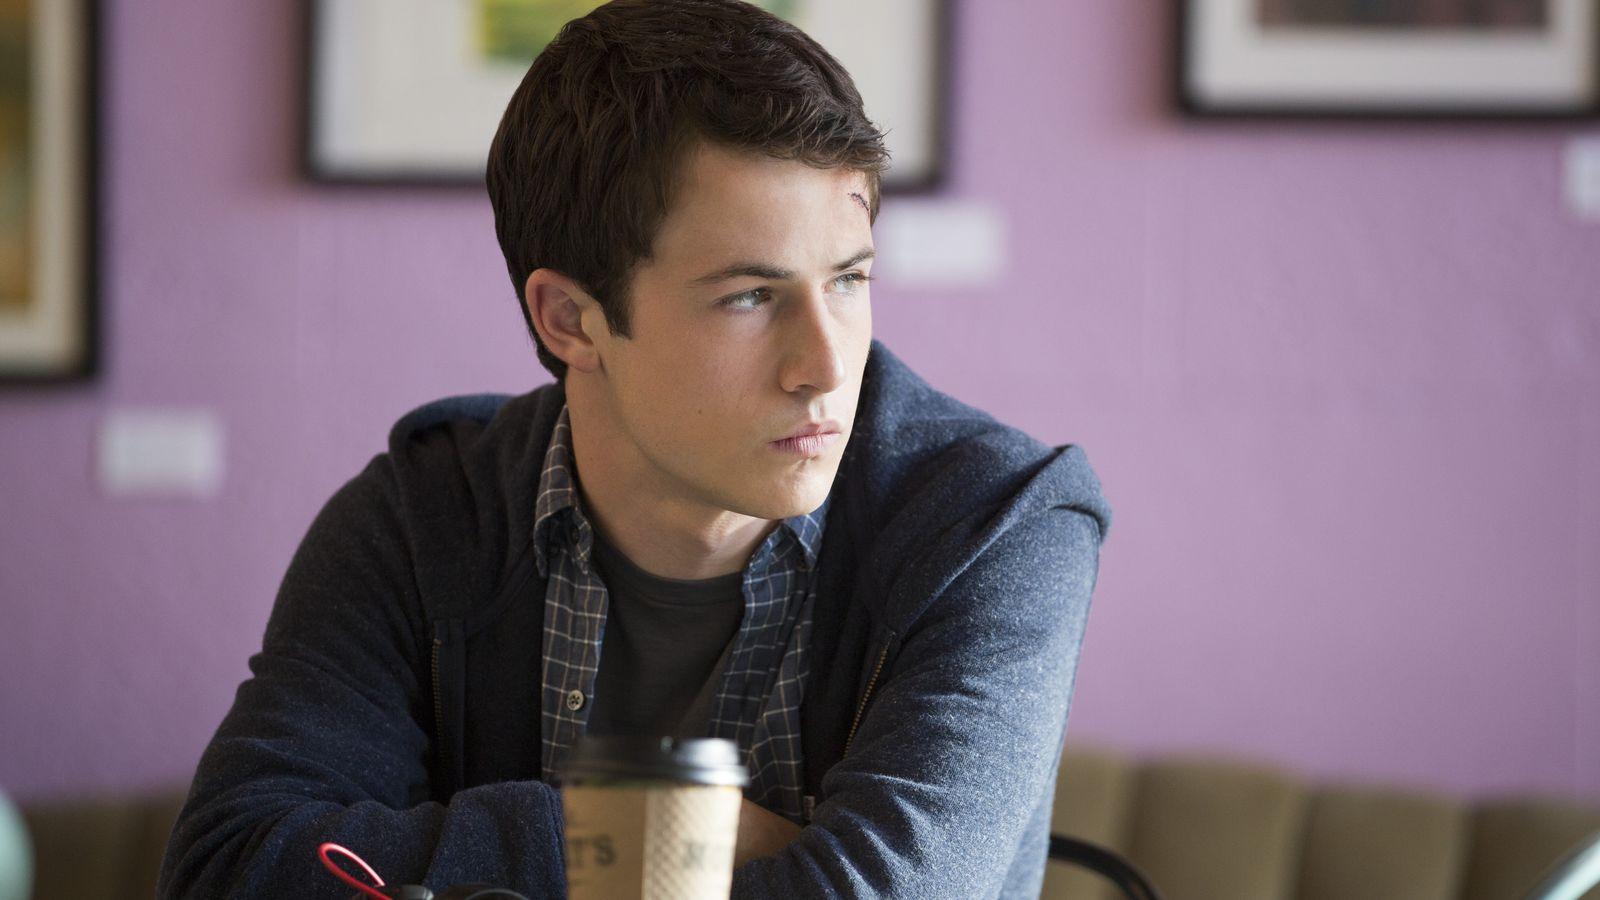 What did Clay do to Hannah in '13 Reasons Why'?